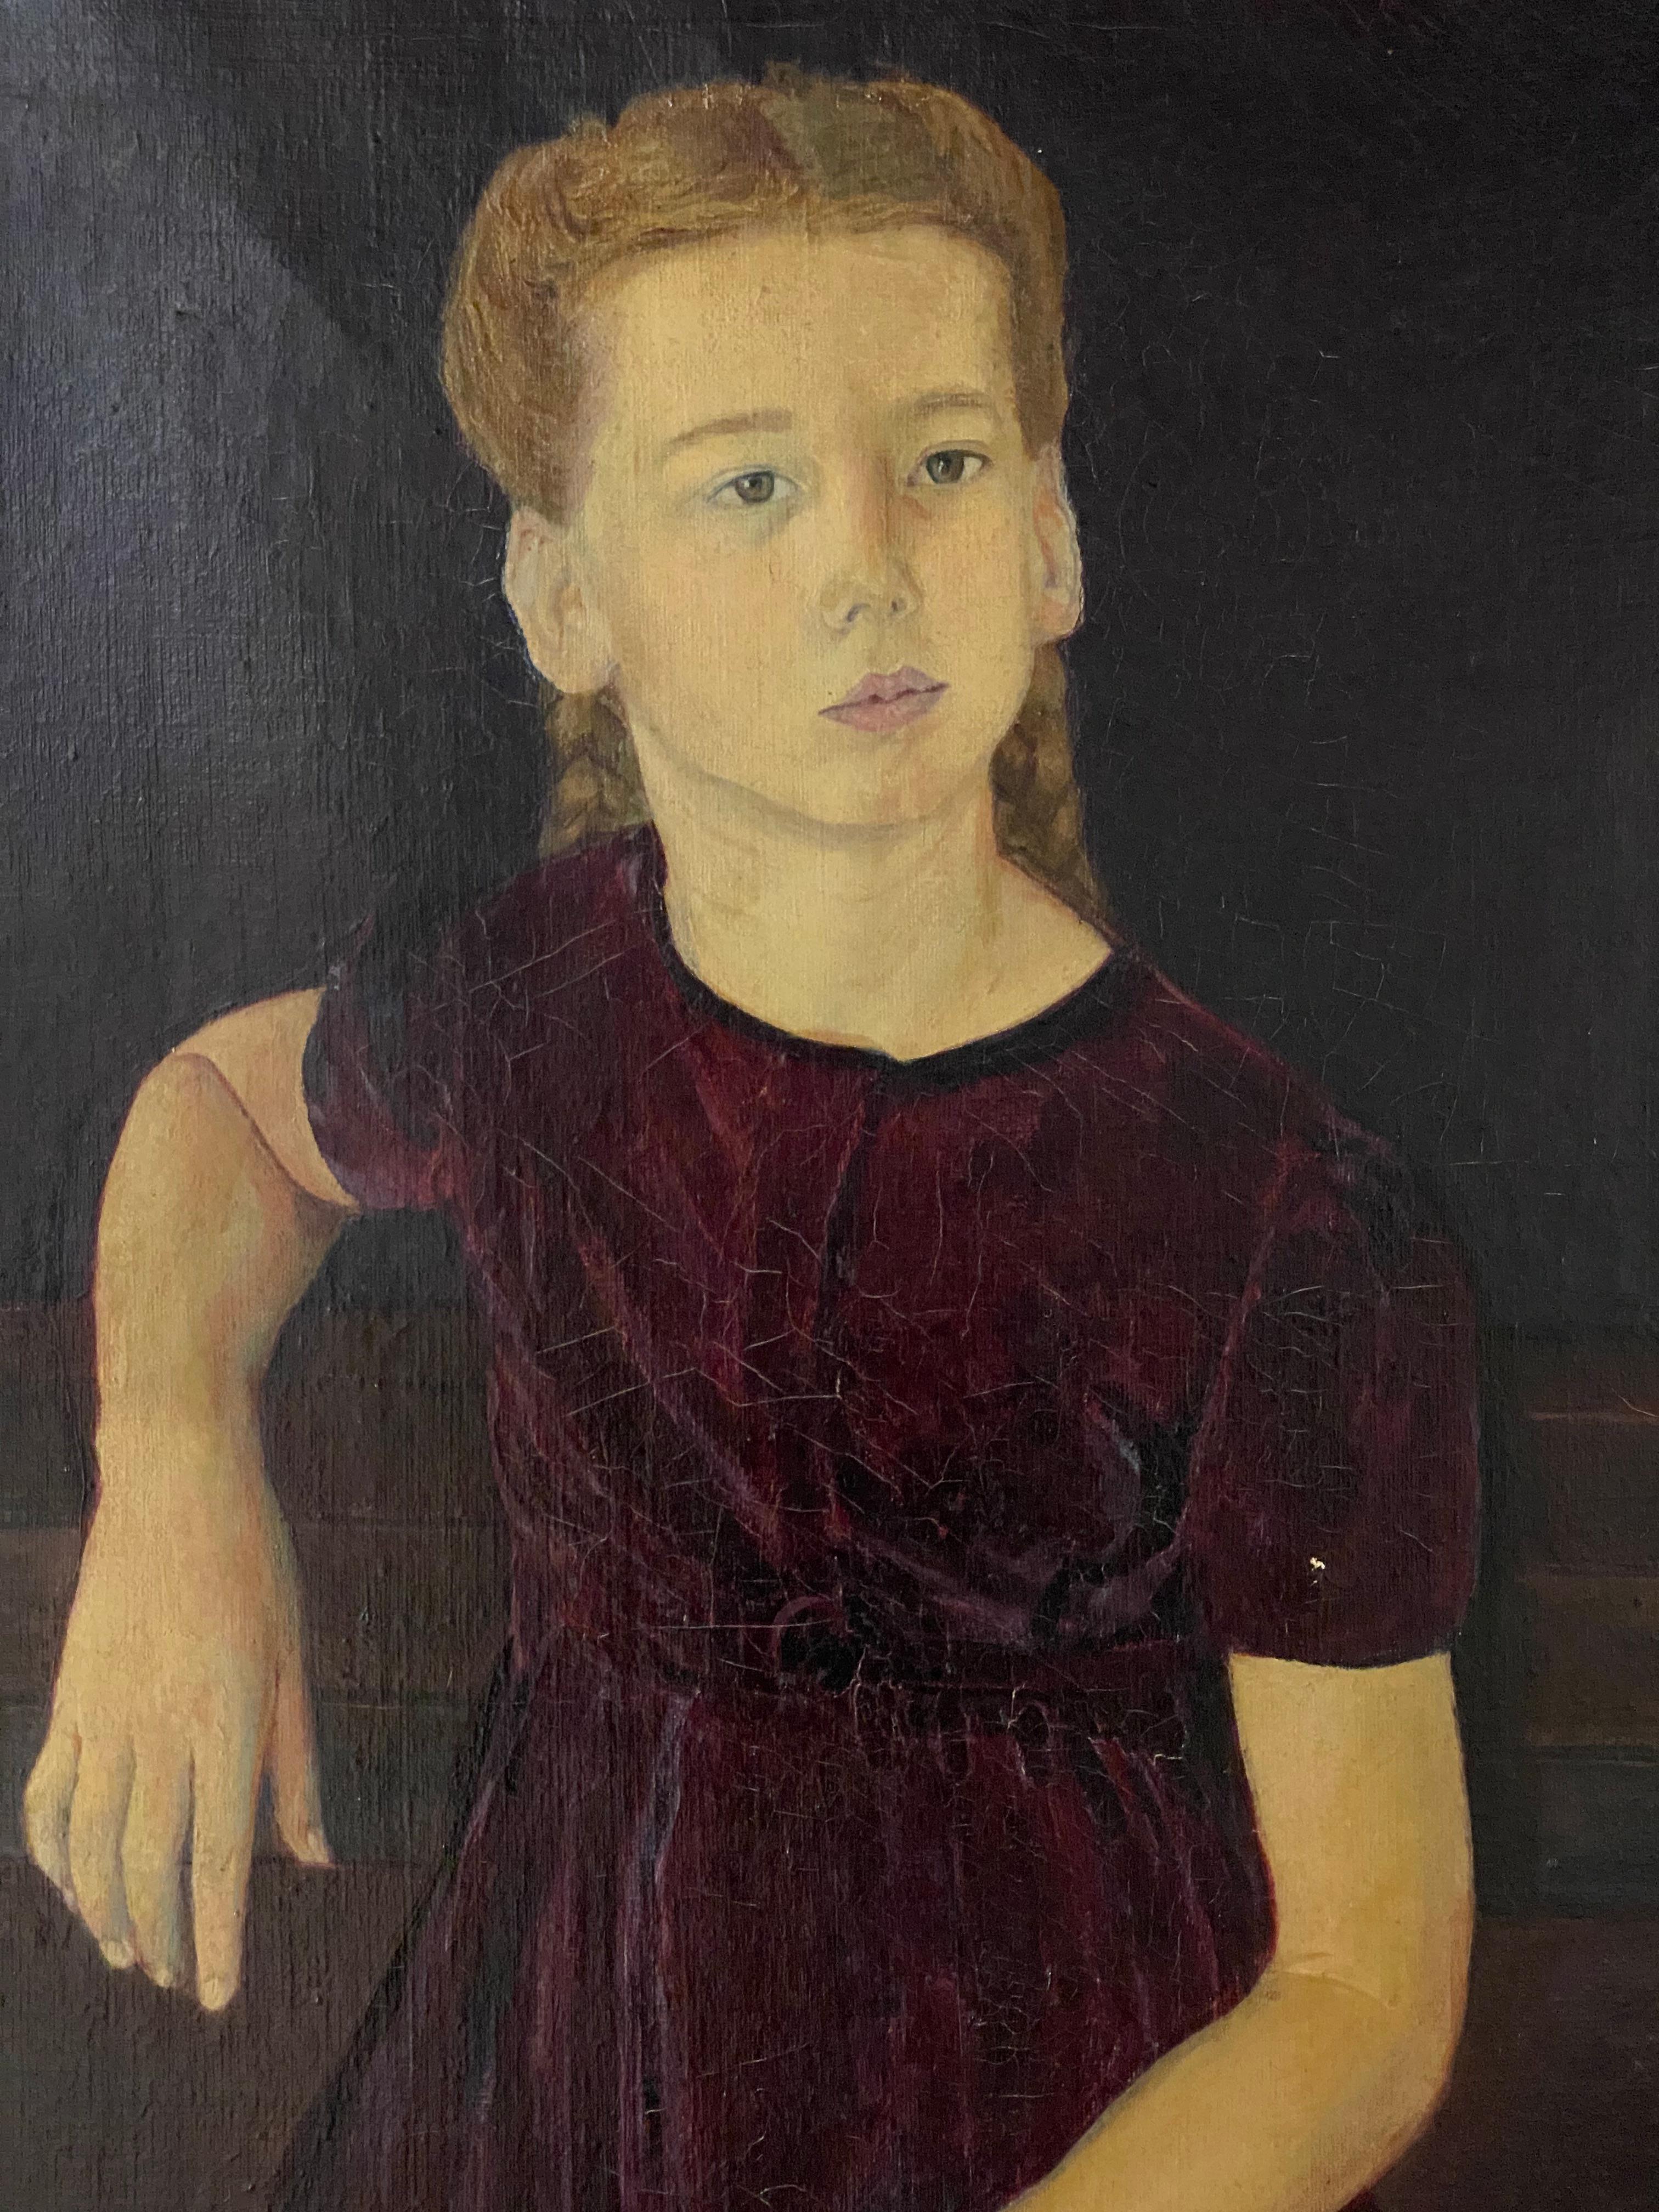 American Portrait of the Young Musician 1944 by Ashley T. Law